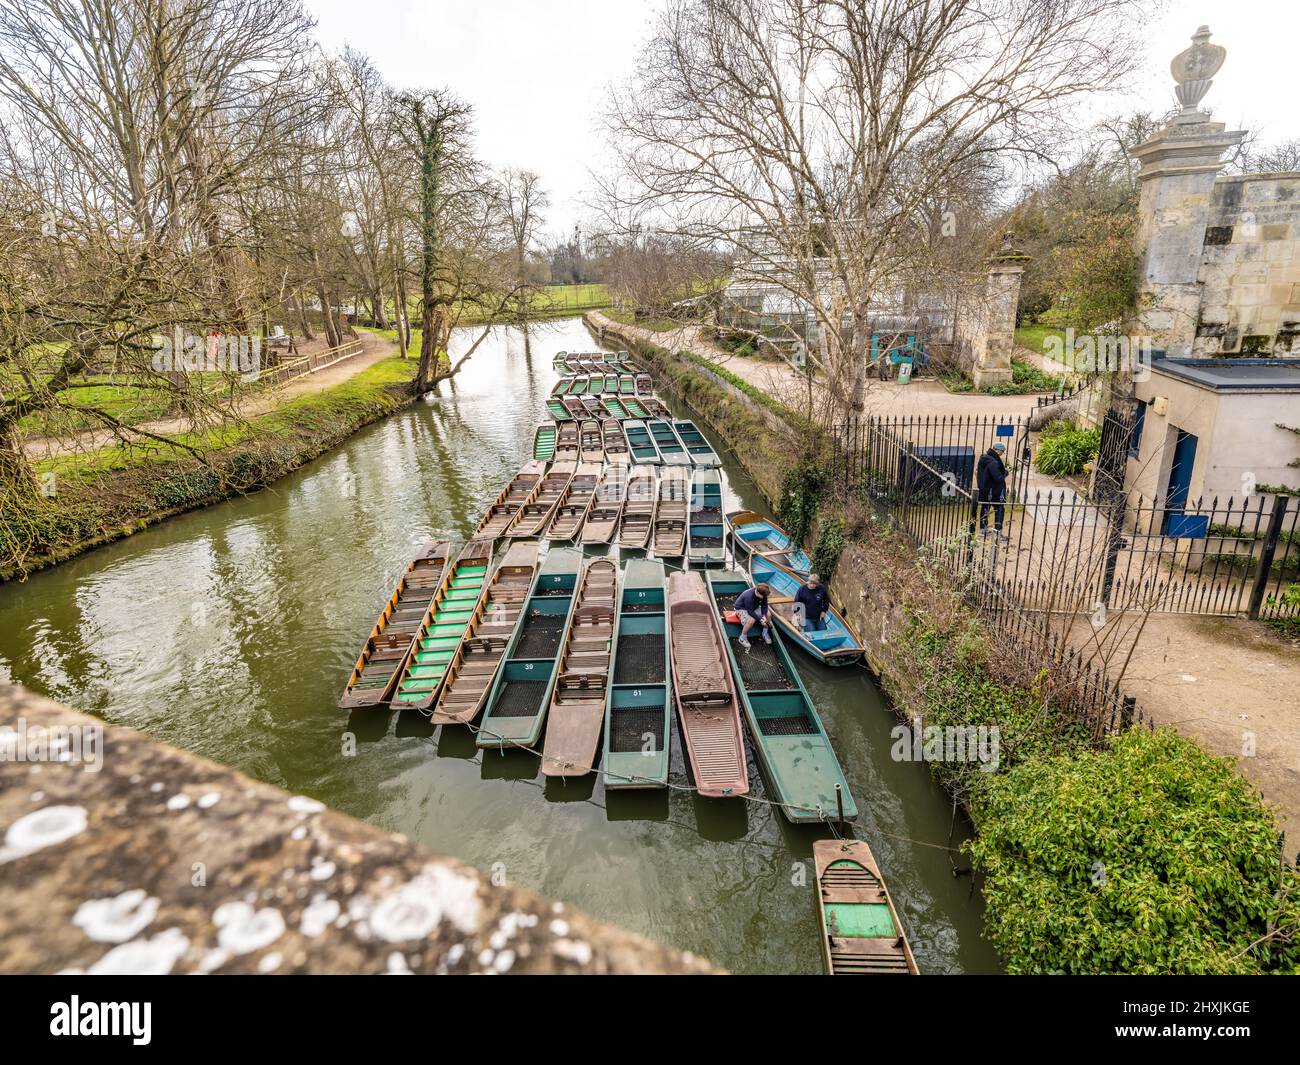 Oxford punting, a business in Oxford that offers the traditional experience of punting down the River Cherwell. The River Cherwell is a tributary of t Stock Photo